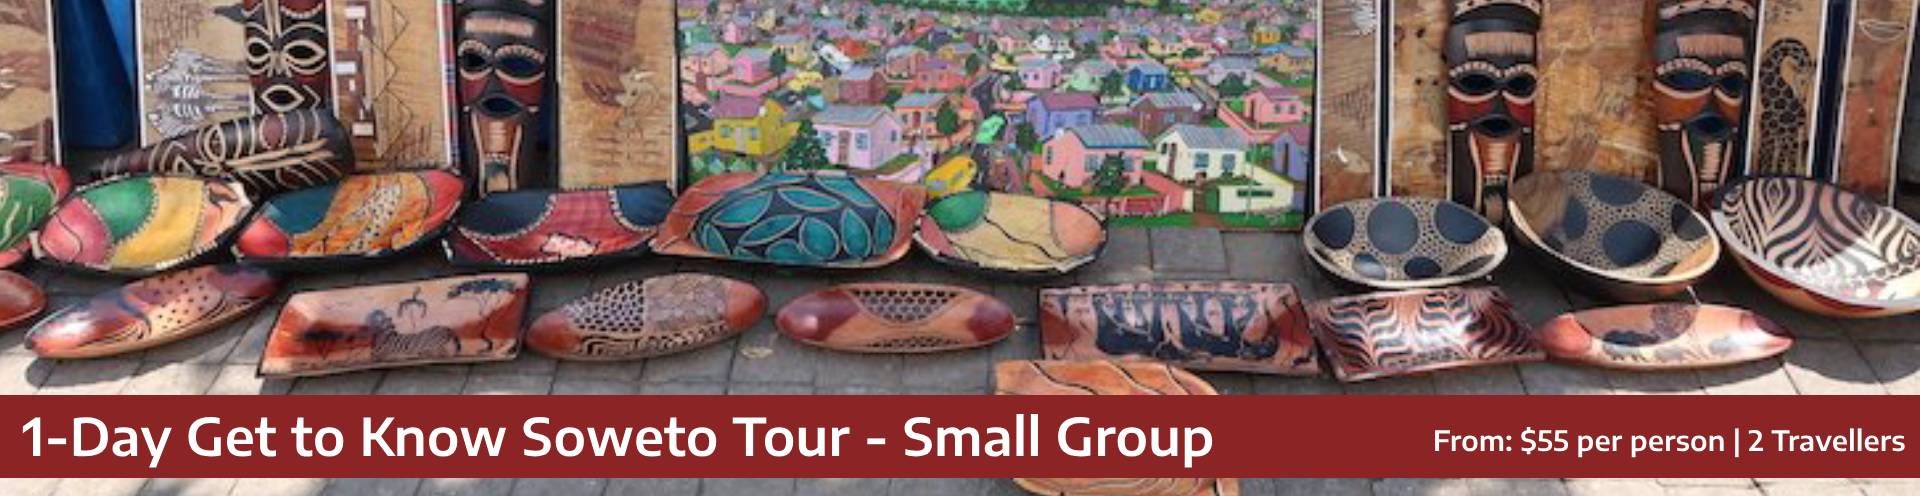 1-Day Get to Know Soweto Tour - Small Group